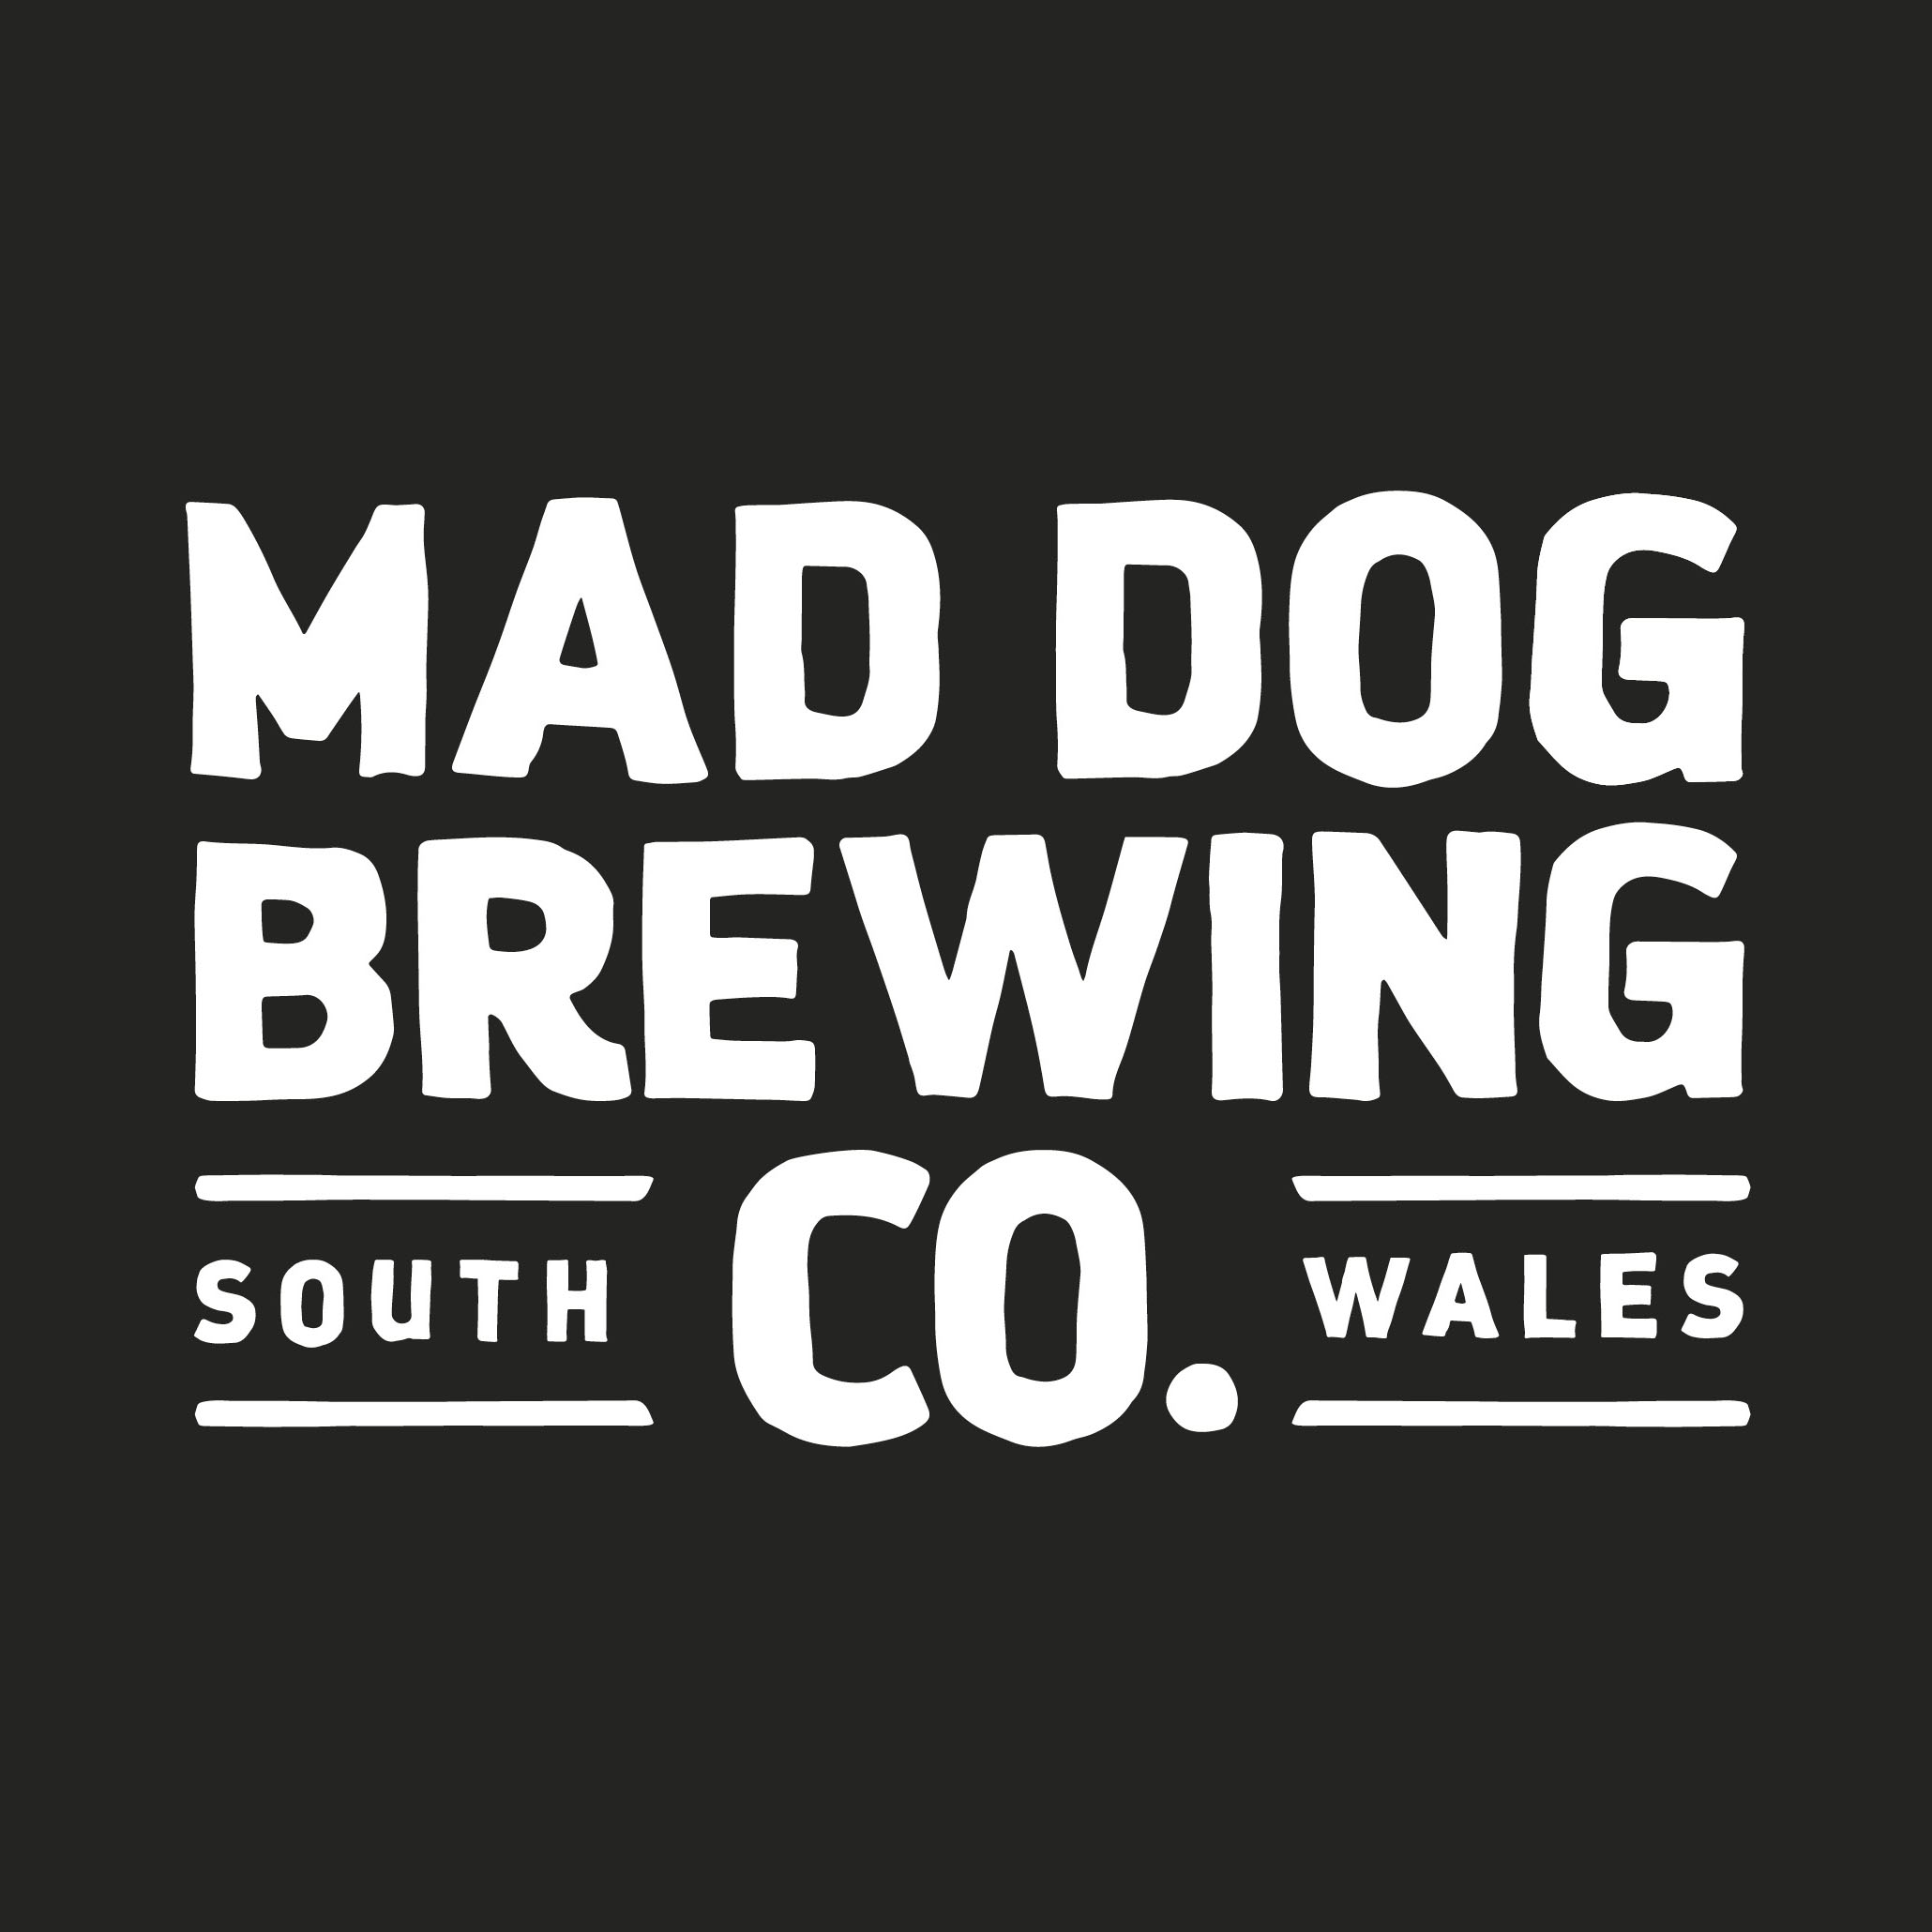 Mad Dog Brewing Co